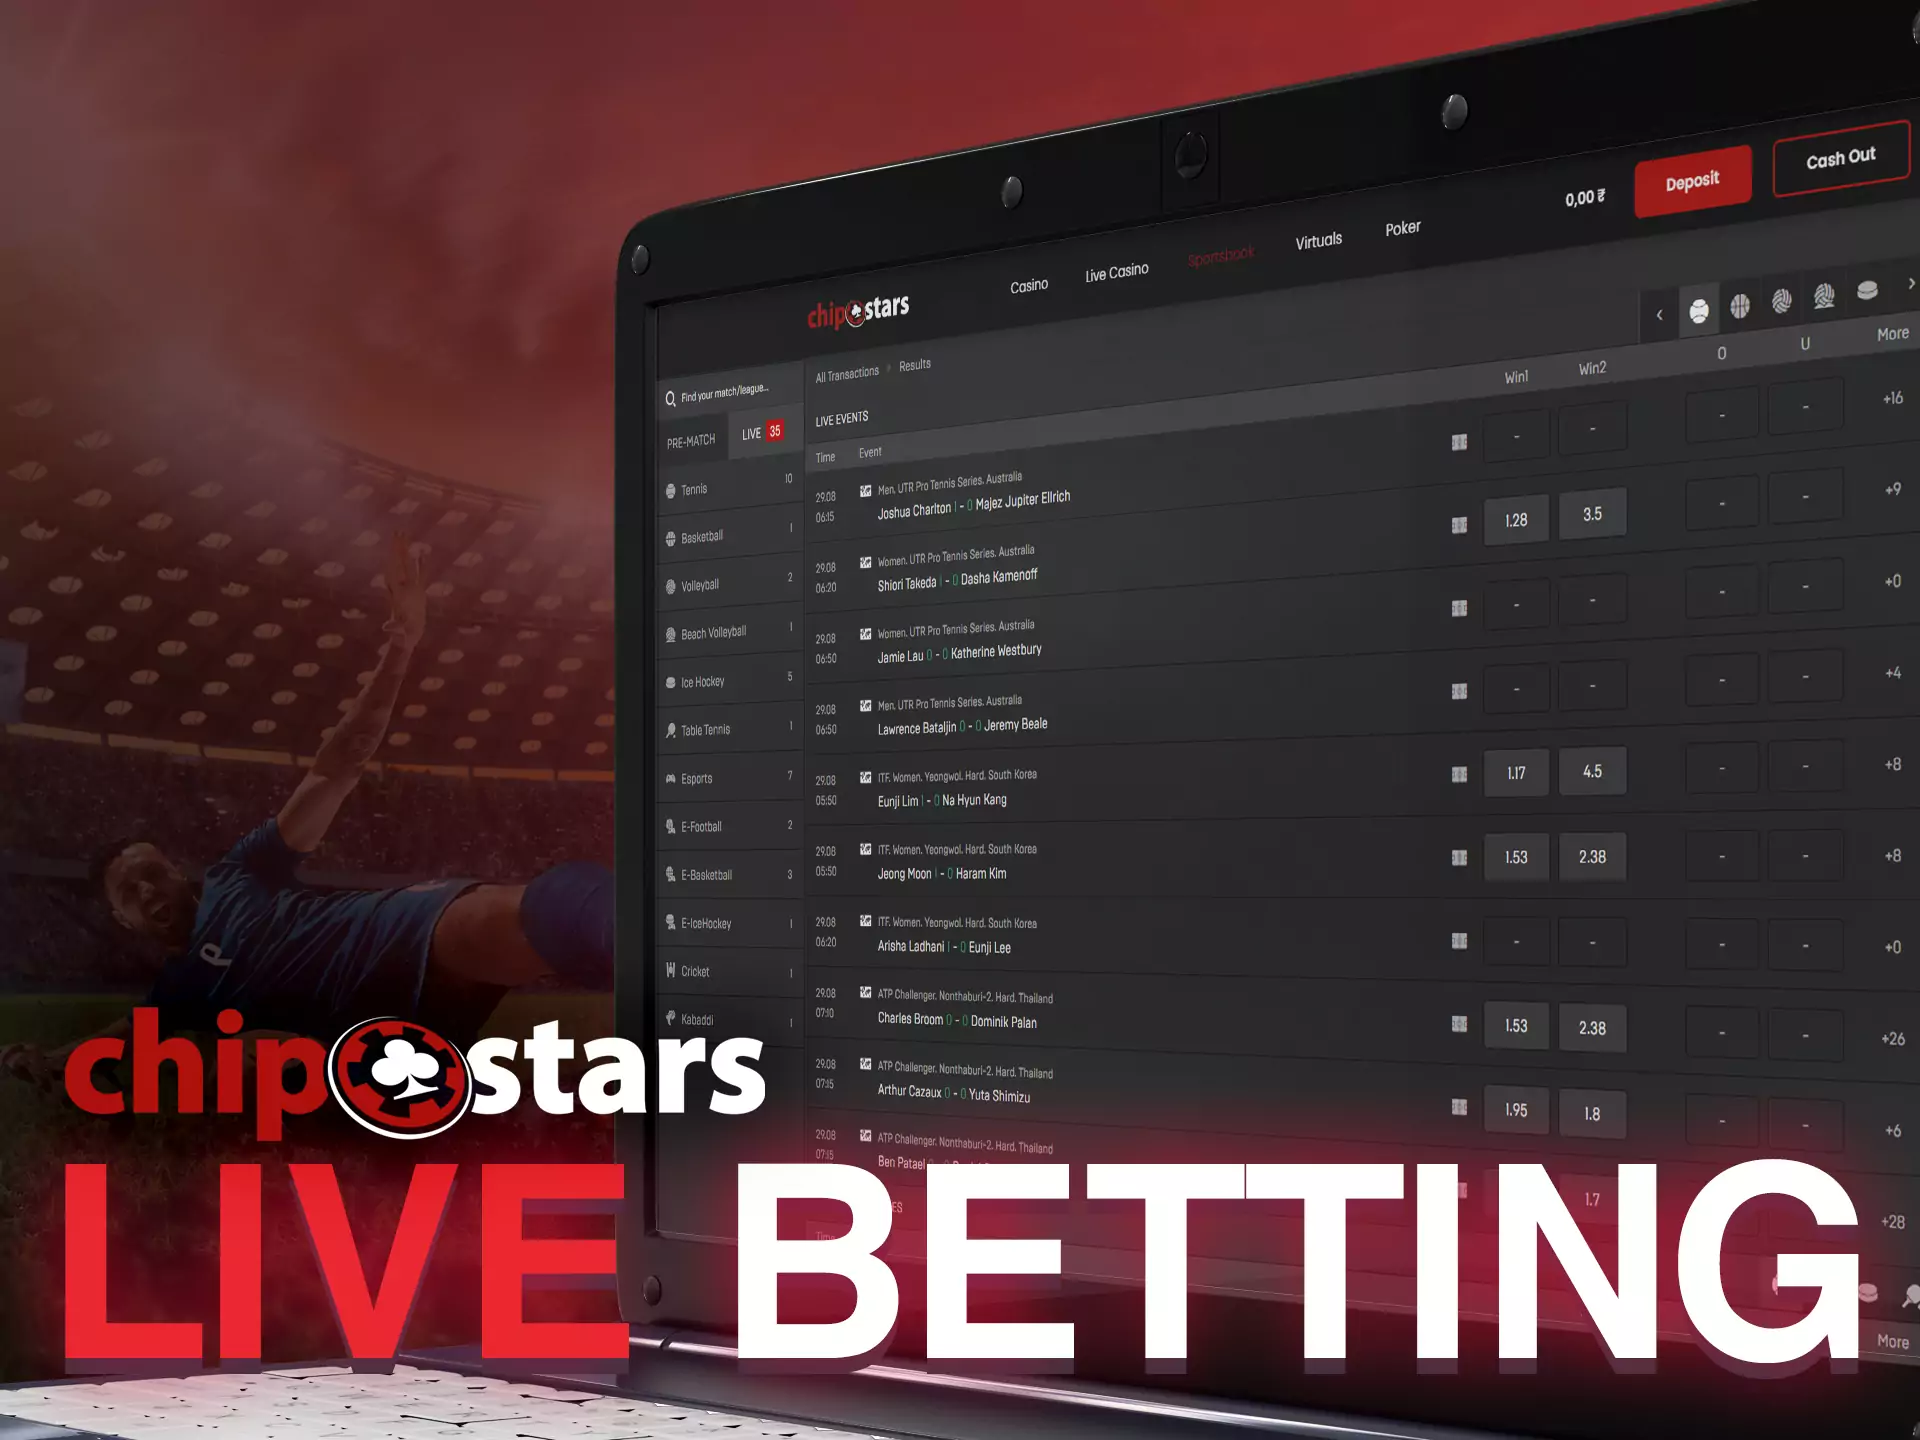 In the live section, you can choose a match and place a bet following this match.